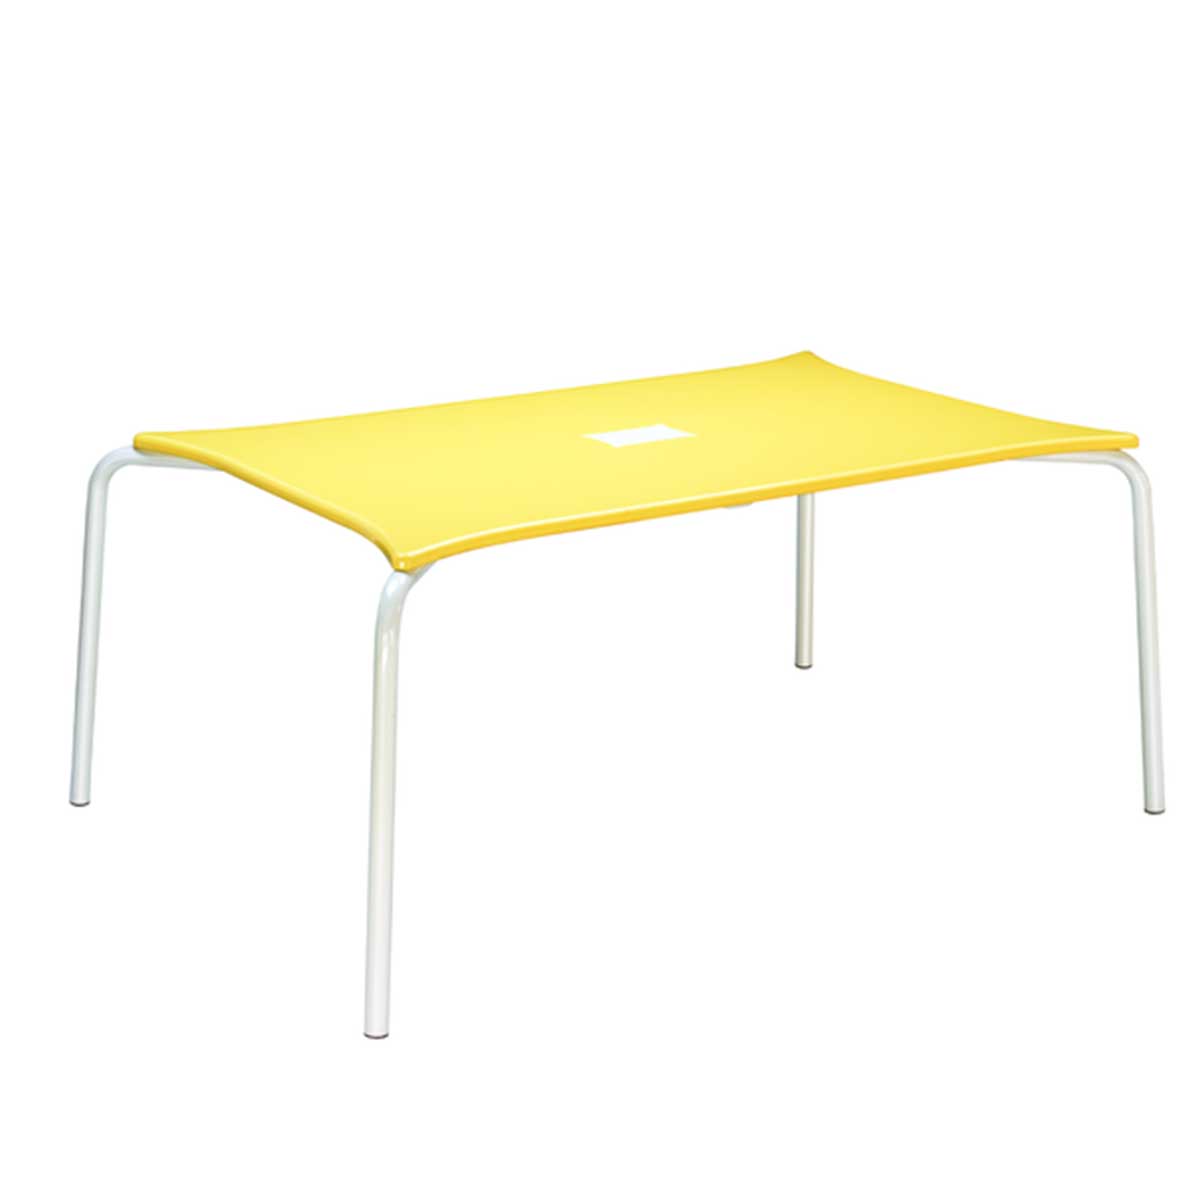 Cafeteria Table Manufacturers, Suppliers in Timarpur